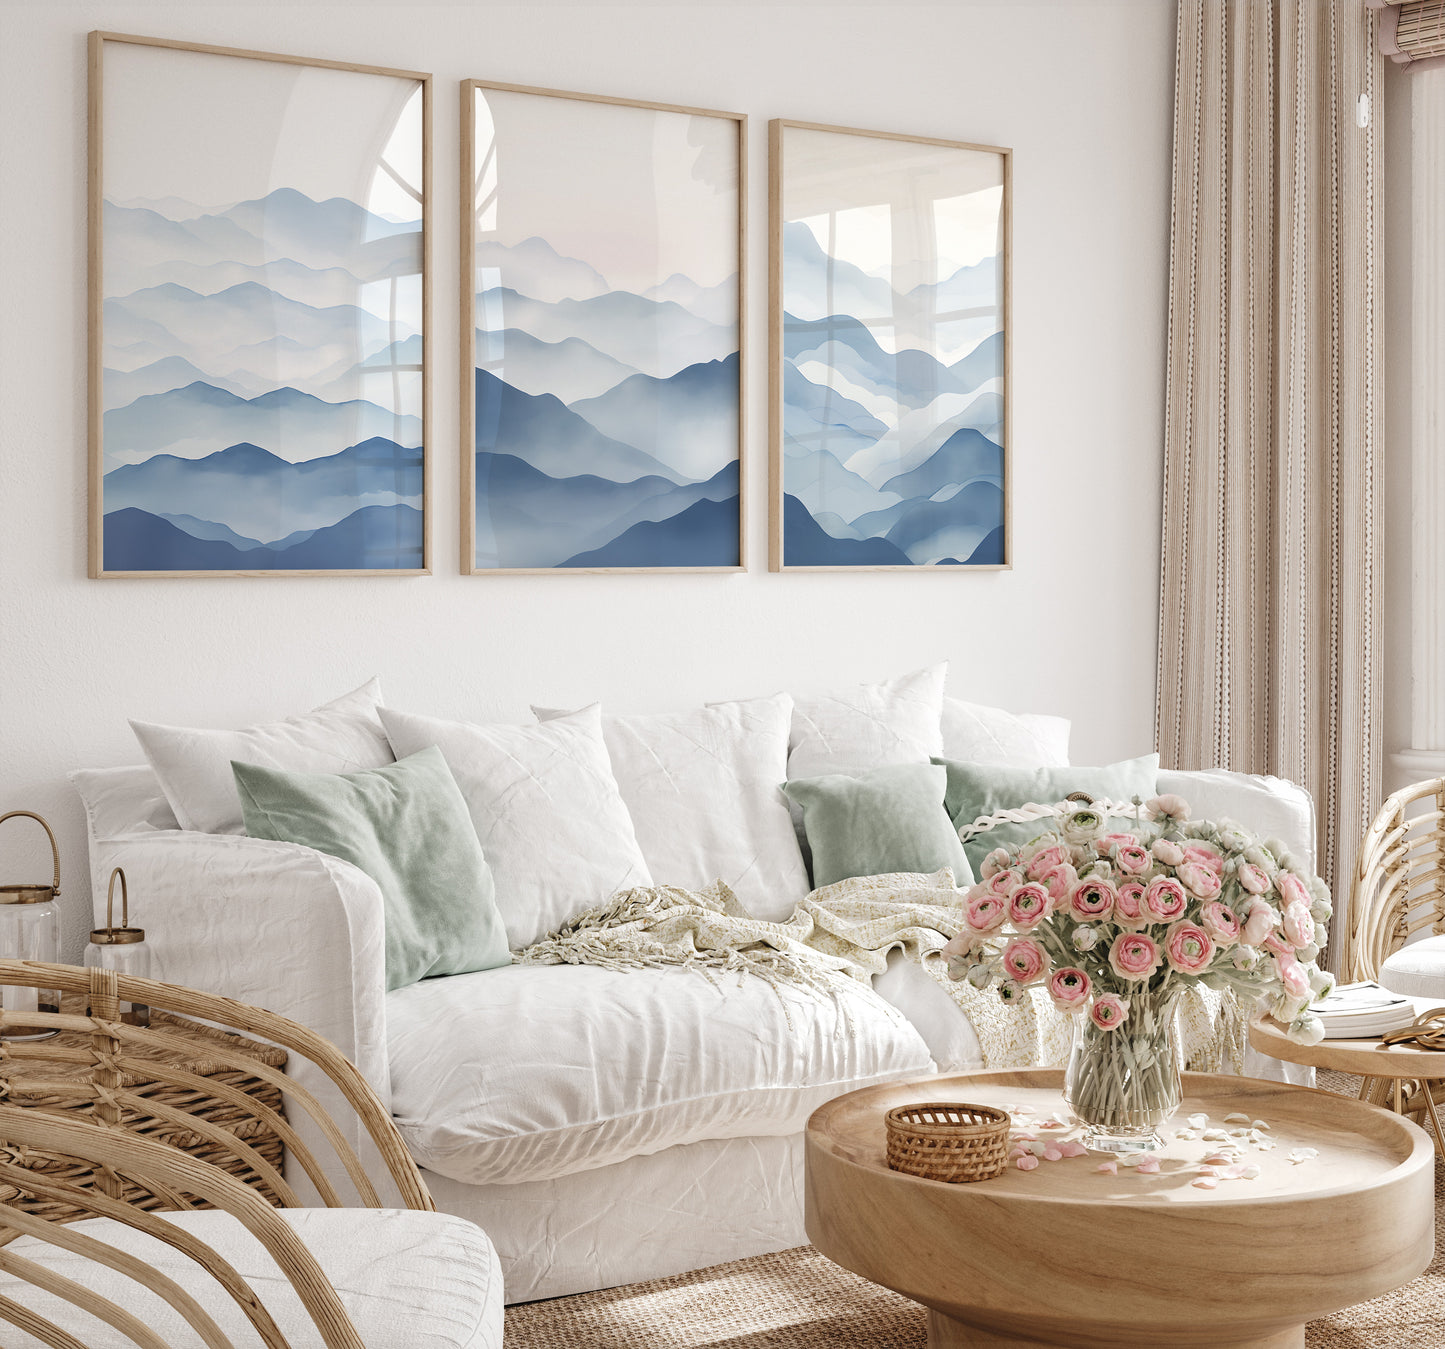 Cozy modern bedroom interior with mountain paintings, white bedding, and a bouquet of pink flowers on a wooden table.